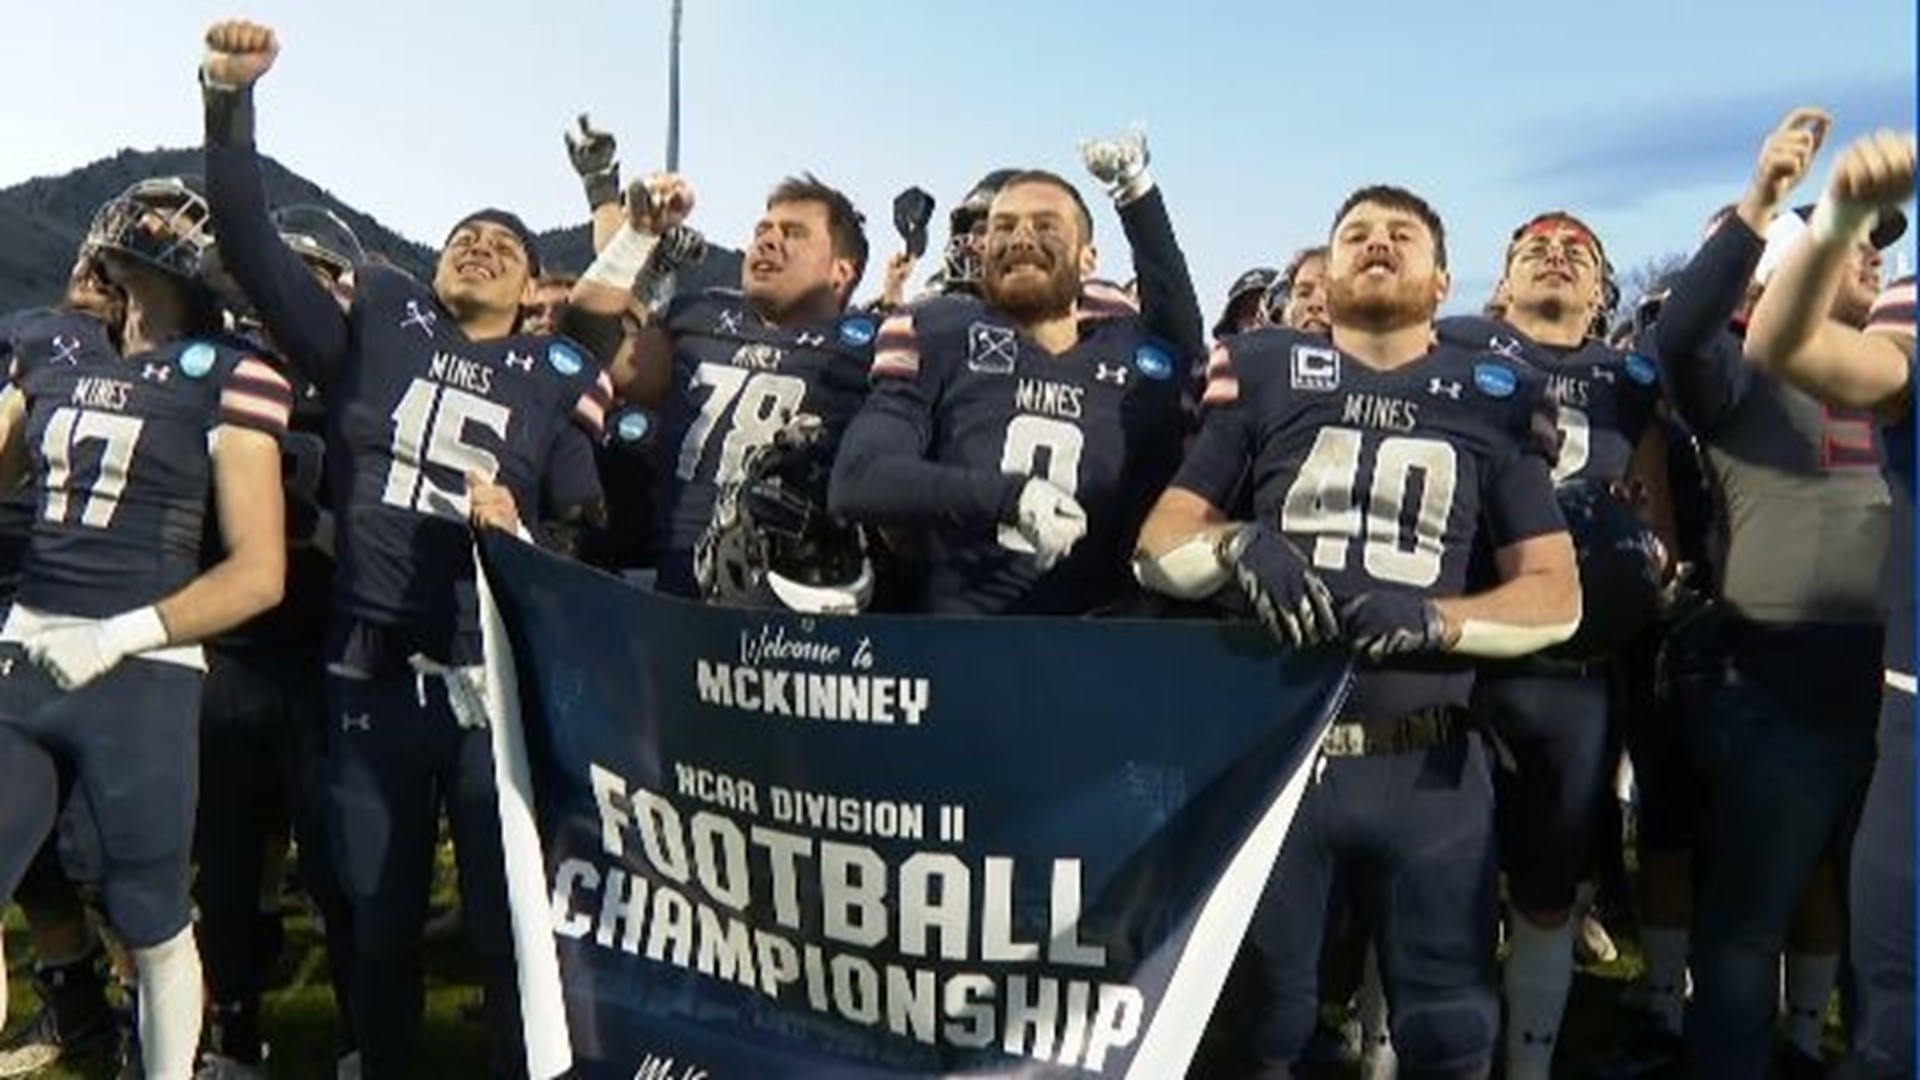 Colorado School of Mines defeated Shepherd 44-13 in its sold out home semifinal game to play for its first and only national championship in McKinney Texas.